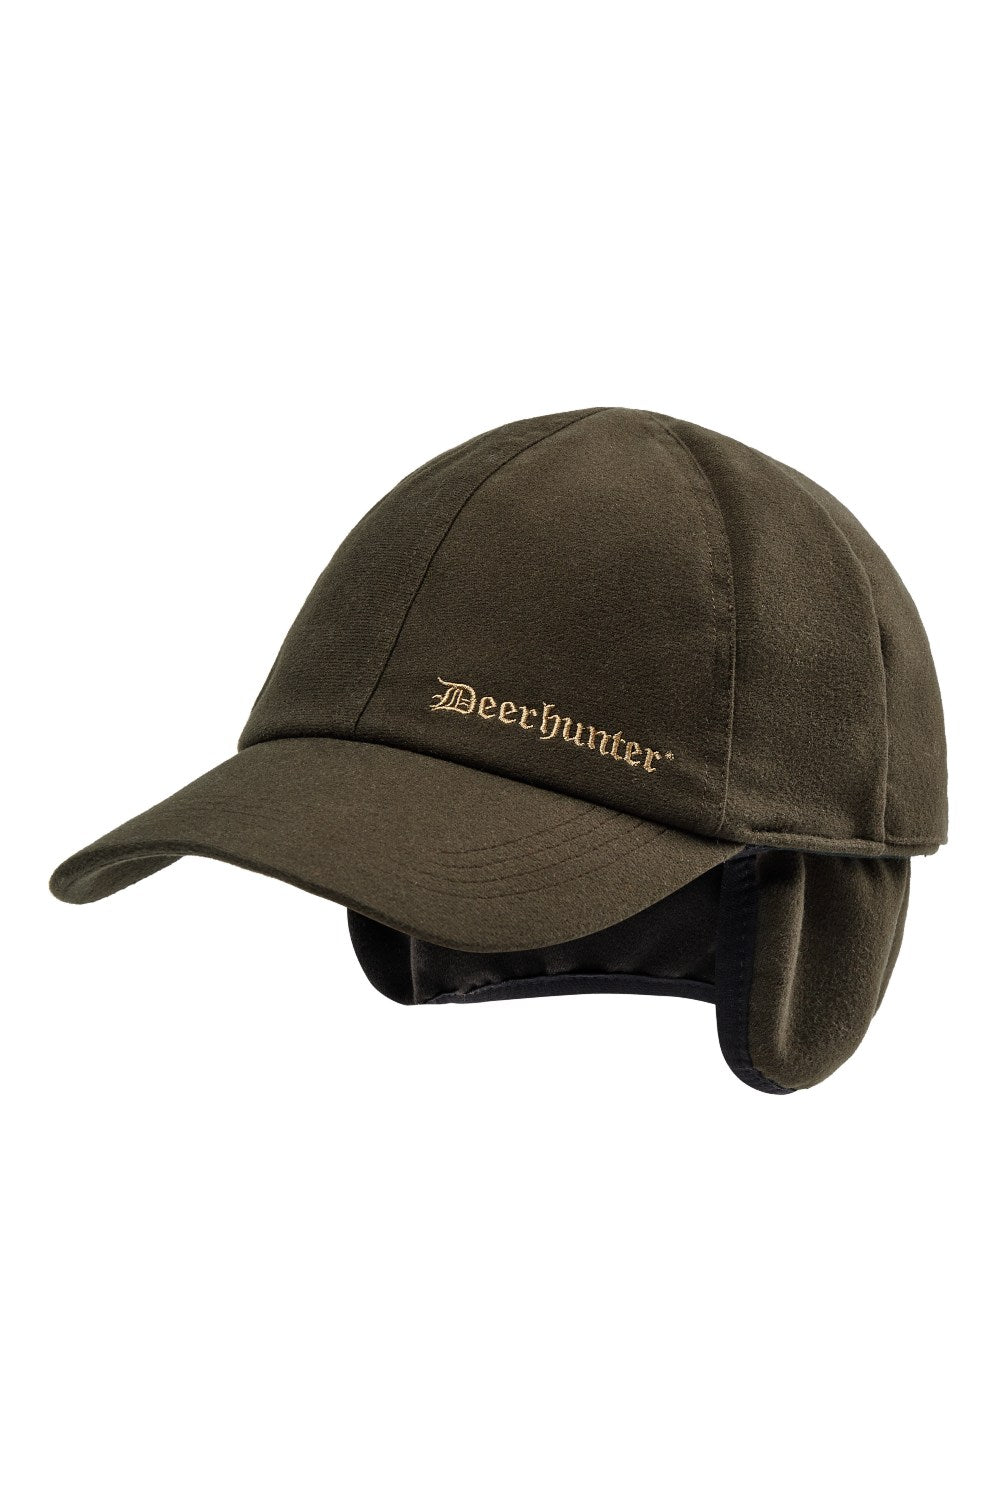 Deerhunter Game Cap with Safety in Wood 